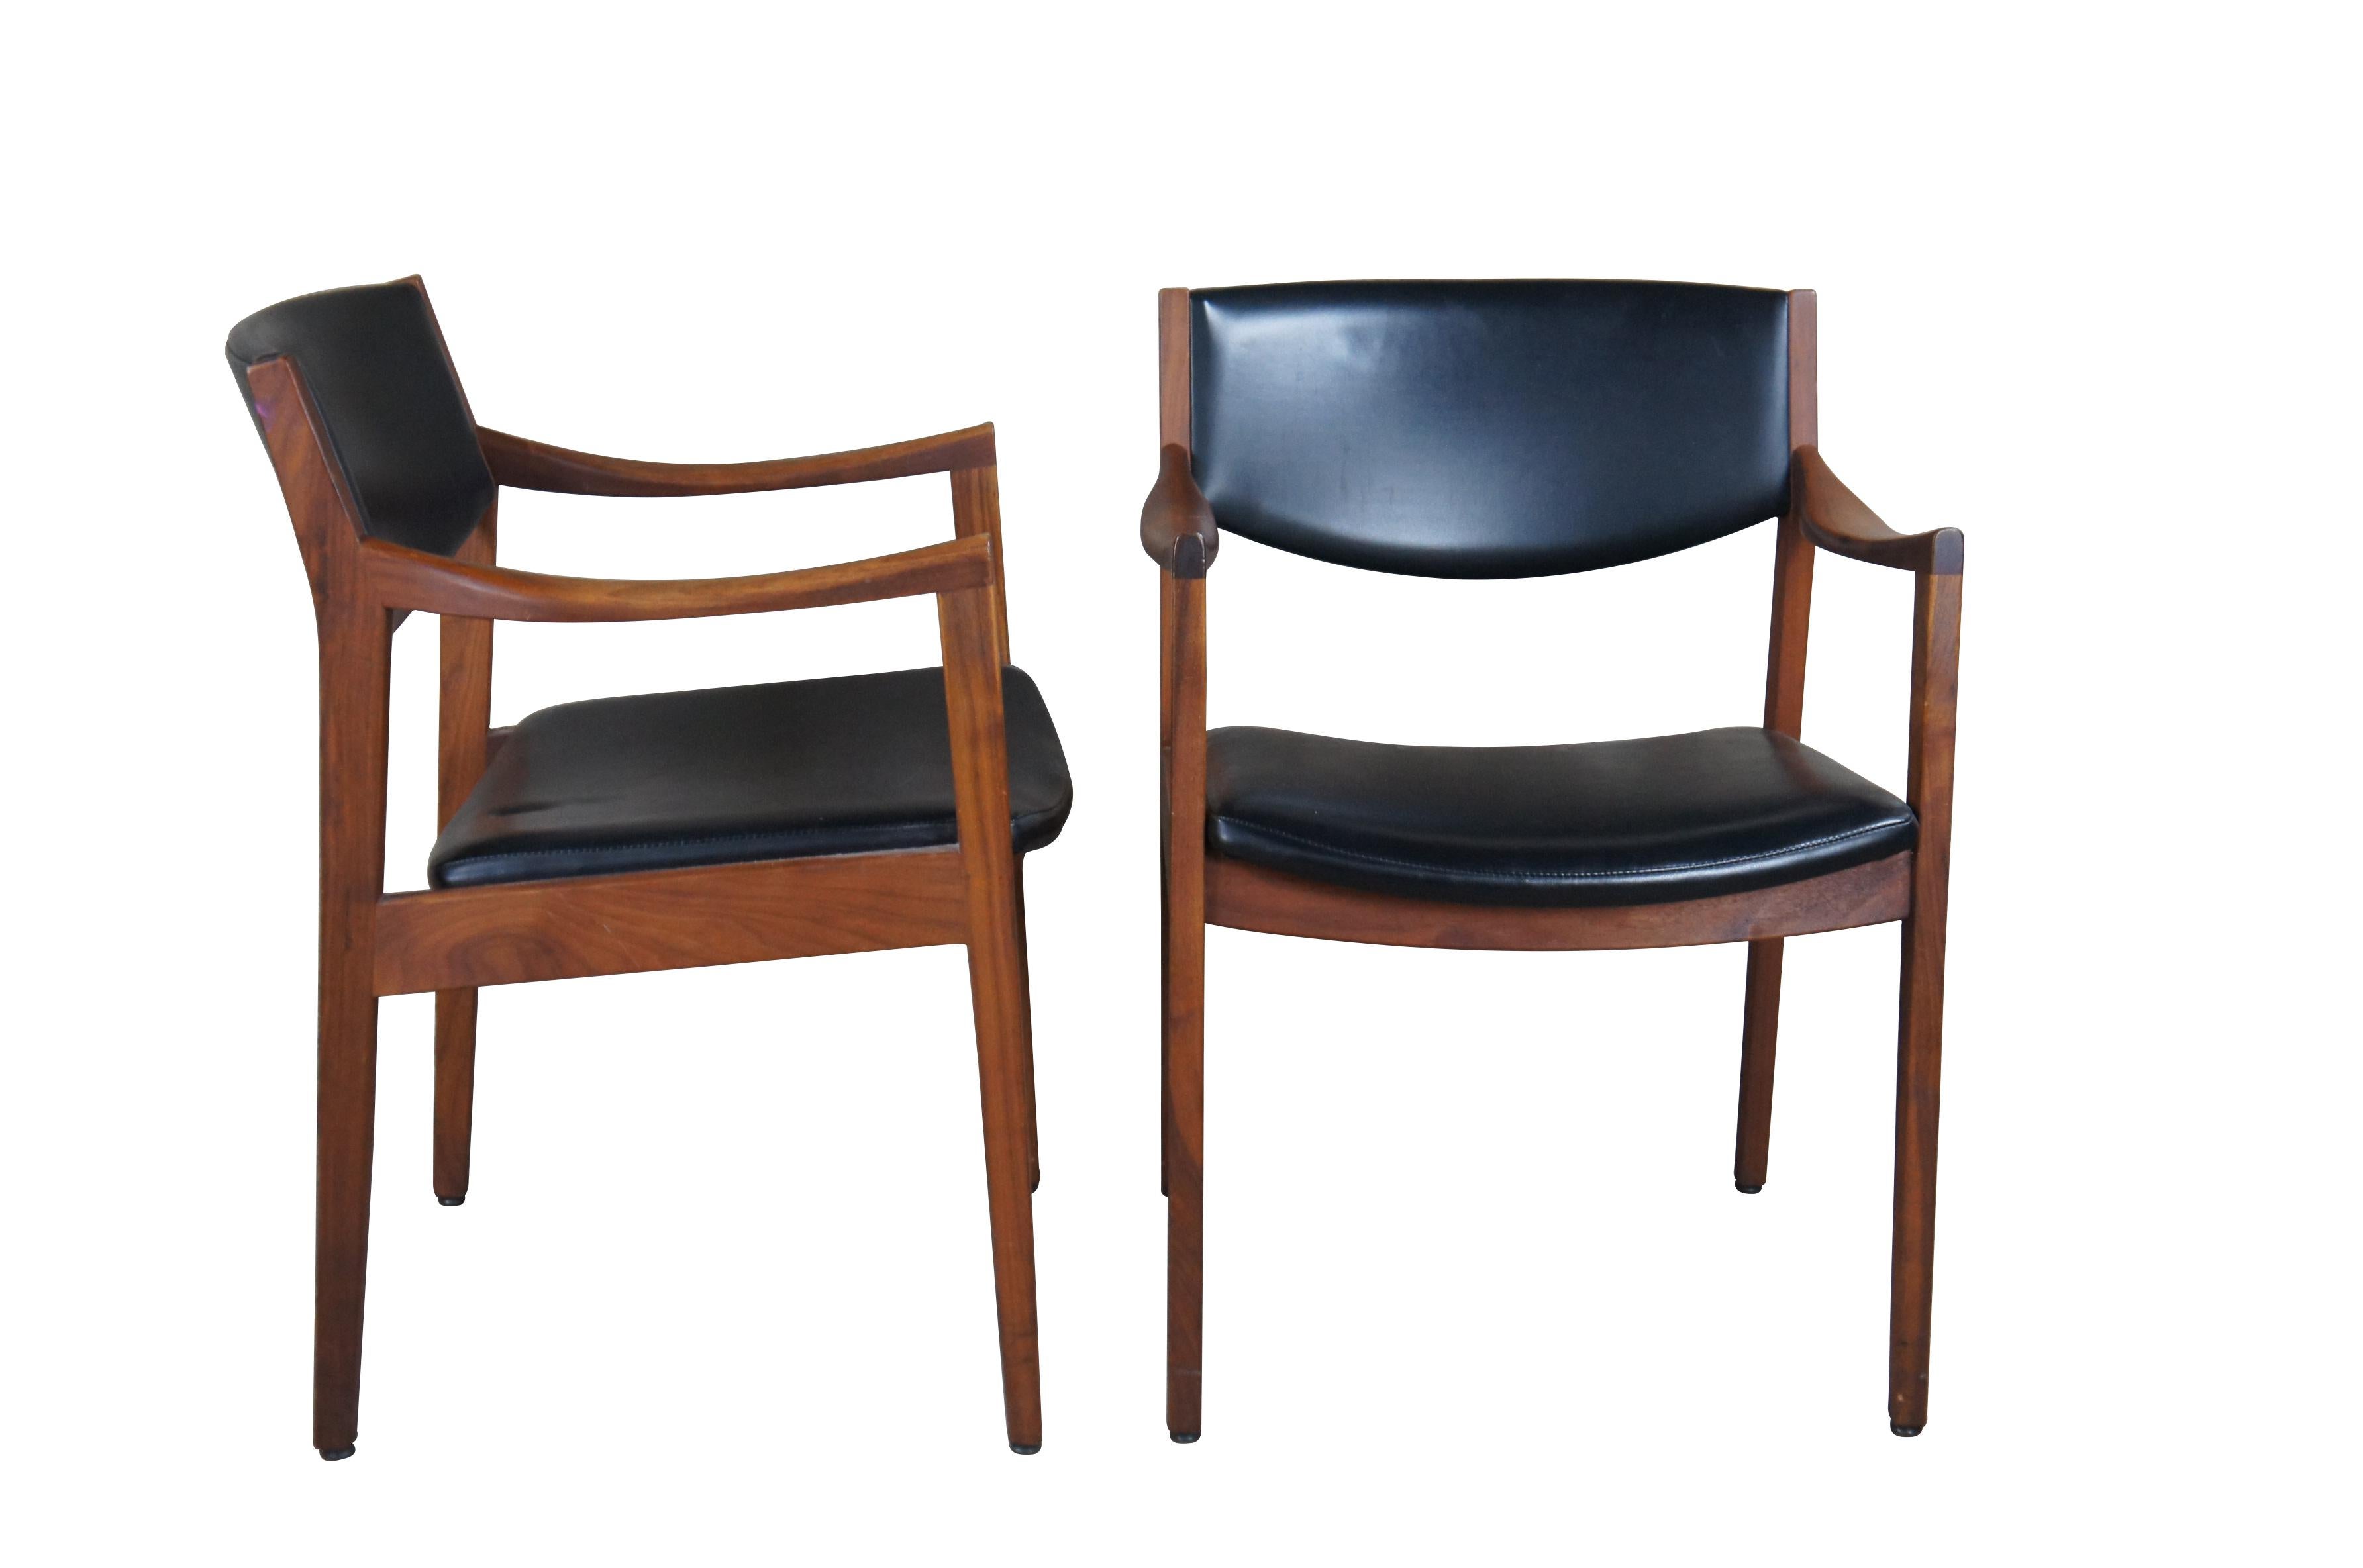 Pair of mid century Gunlocke Jens Risom Style Danish Arm Chairs.  Made of walnut with black leather seat and back.  

The Gunlocke Company's history in Wayland, New York begins in 1902 when William H. Gunlocke and four other wood furniture experts